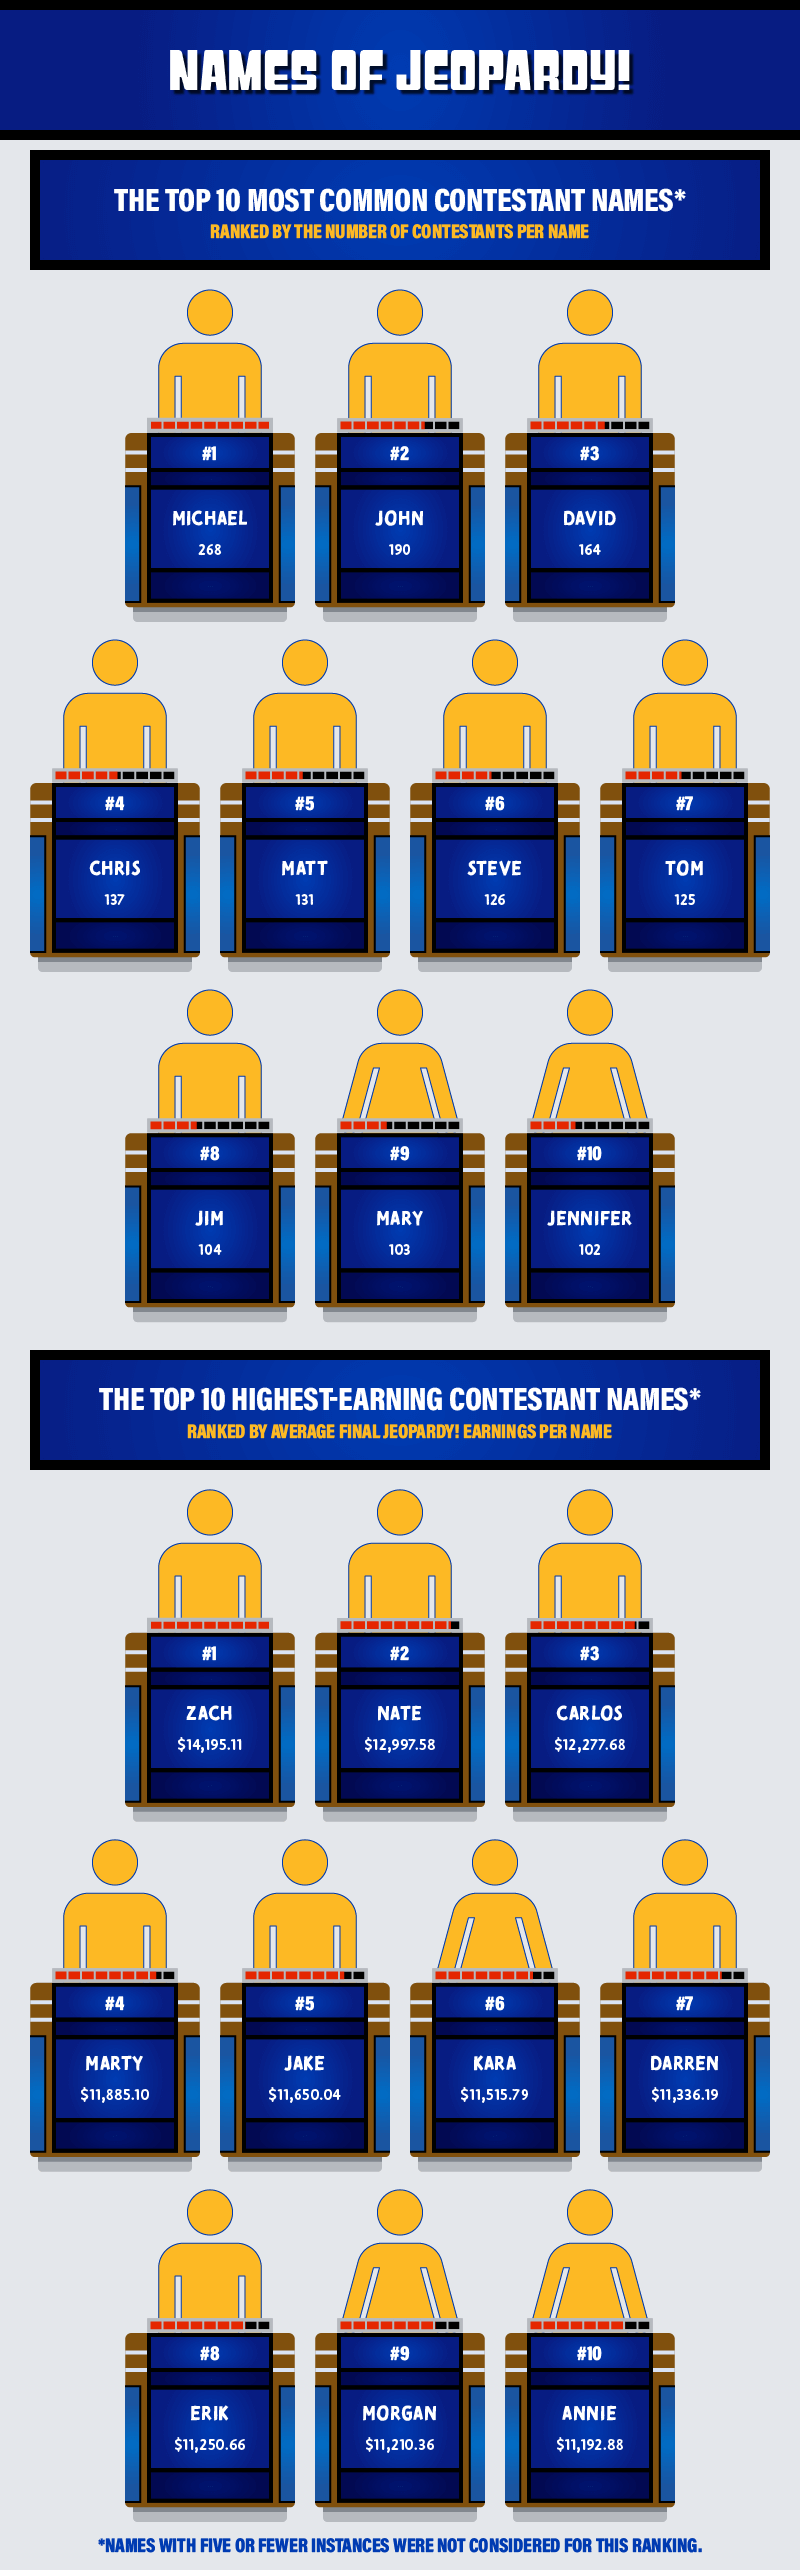 Themed graphic presenting the most common and highest-earning Jeopardy! contestant names 